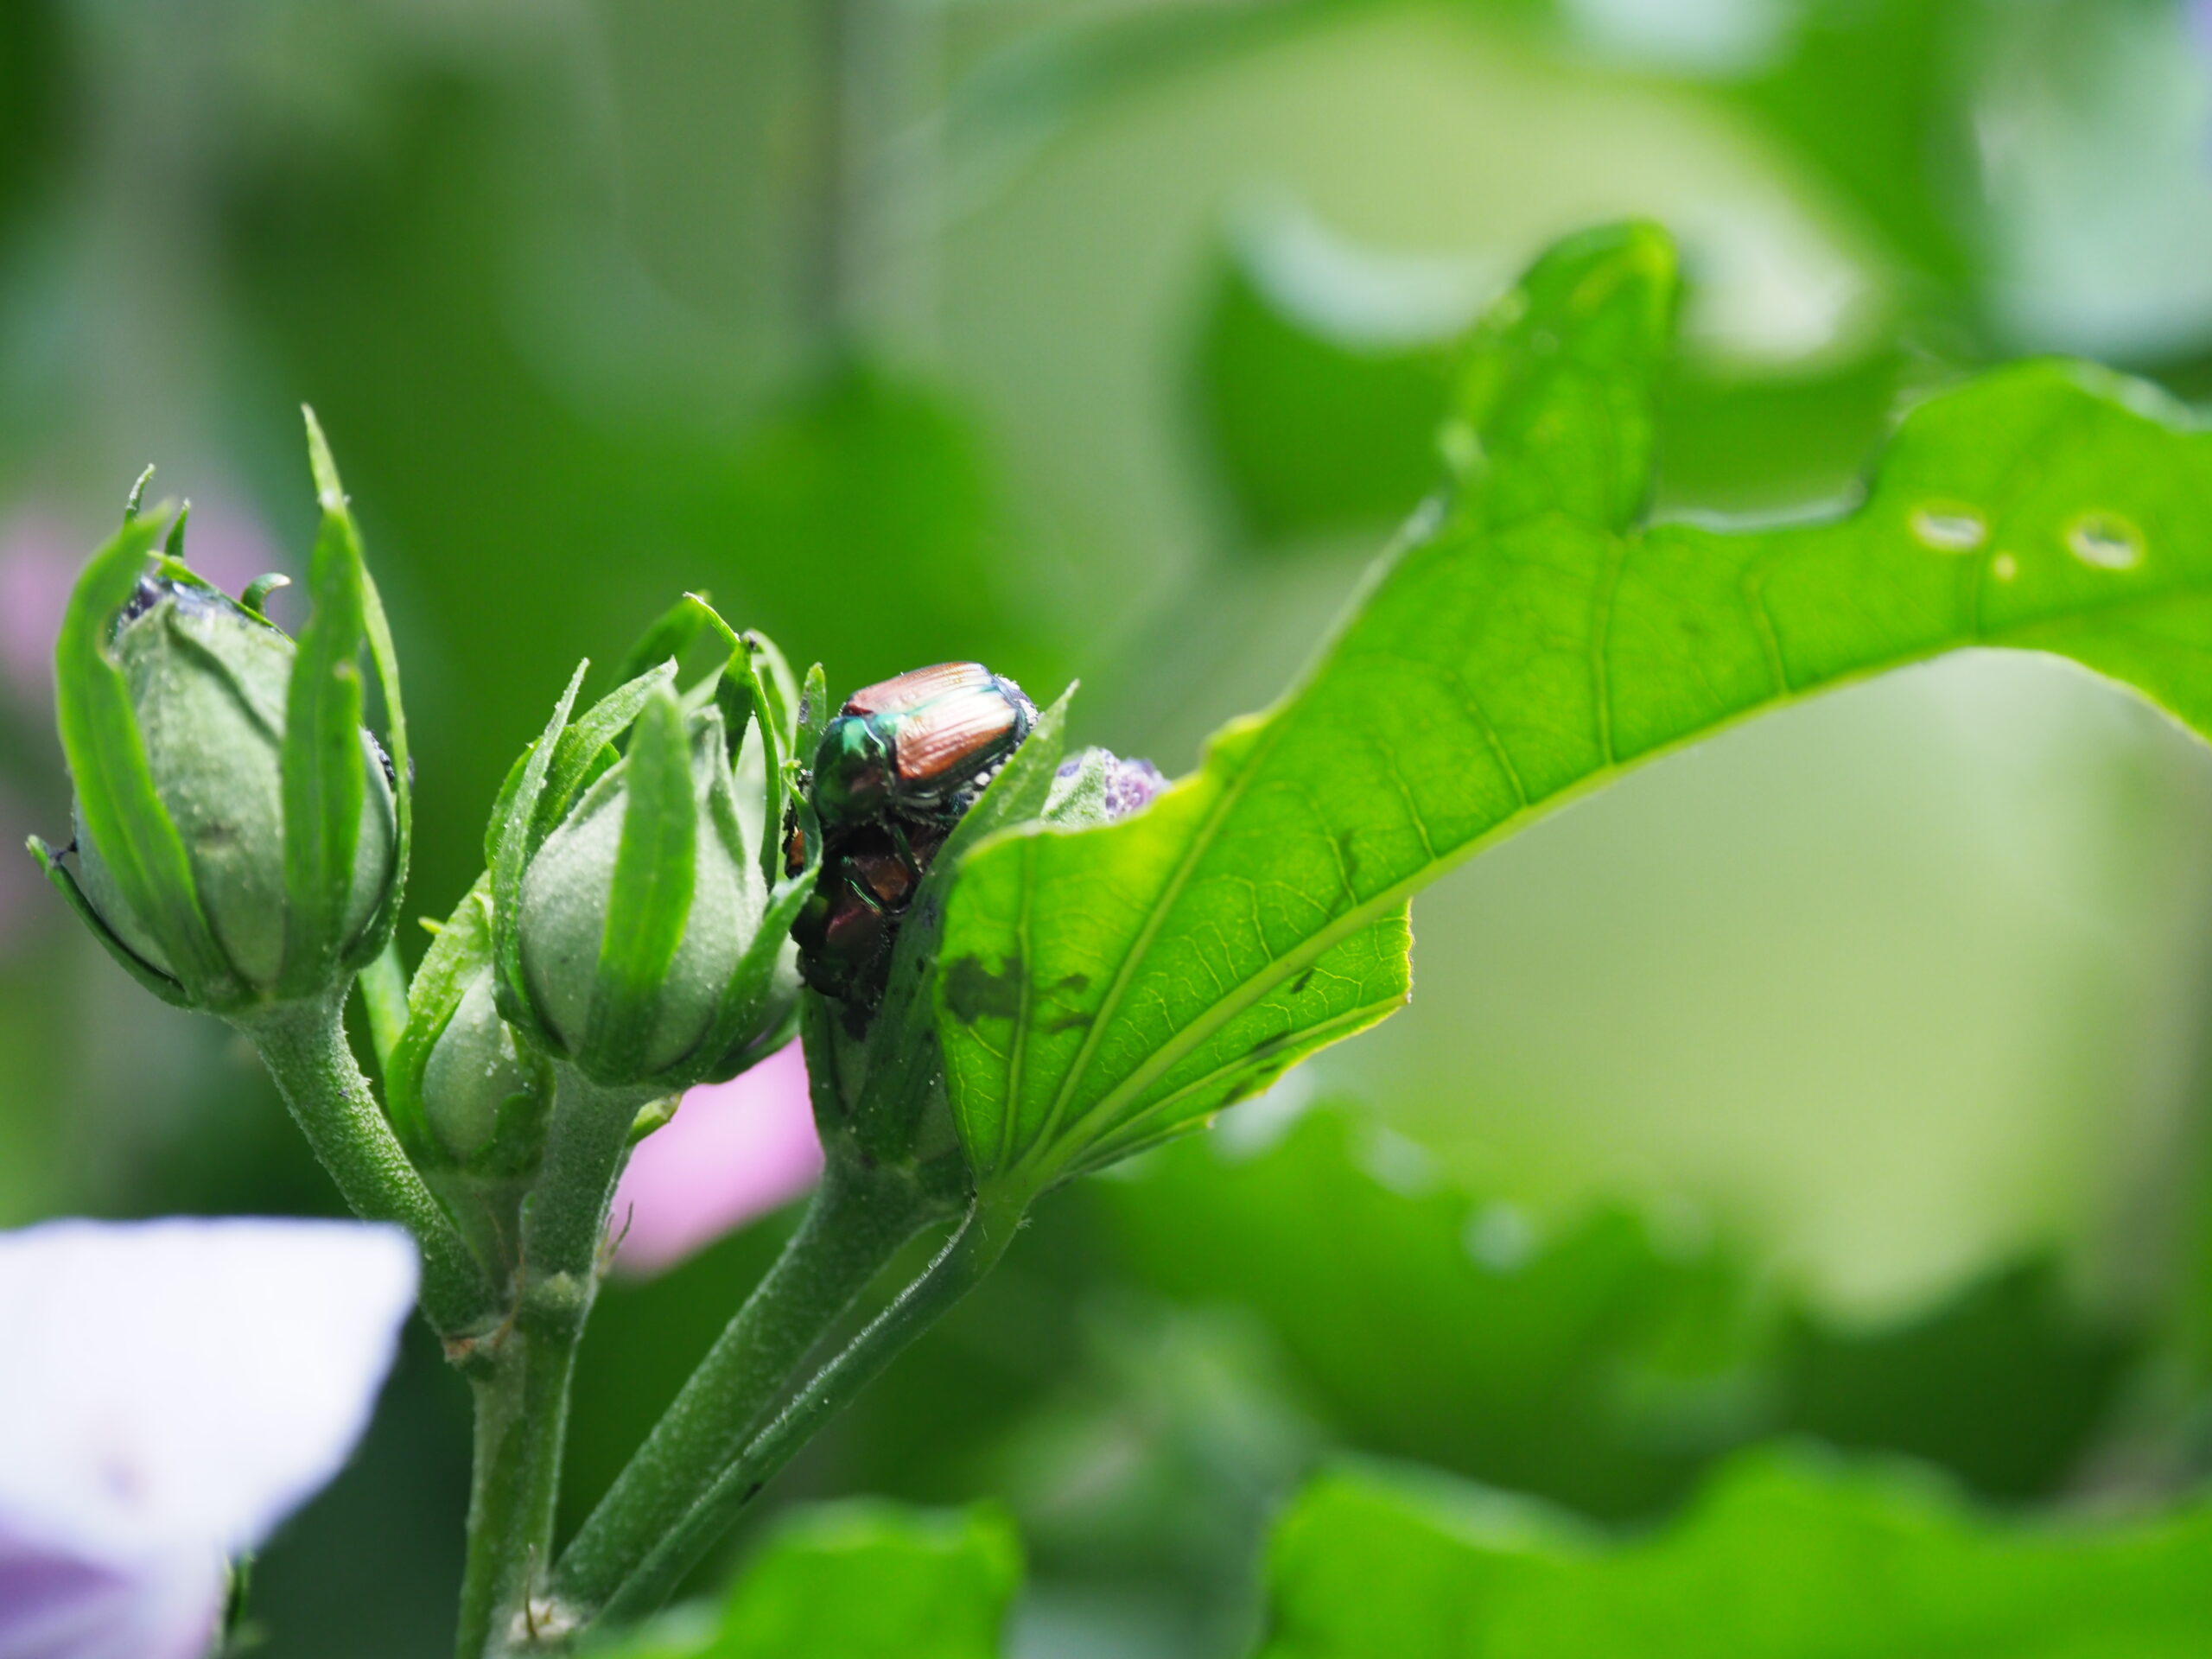 Japanese beetles will feed on a wide range of plants. However, they are one of the few beetles that will feed on flowers as well as on foliage. They are particularly fond of hibiscus (rose of Sharon shown here) and roses. Note the beetle feeding on the flower and the already damage foliage.